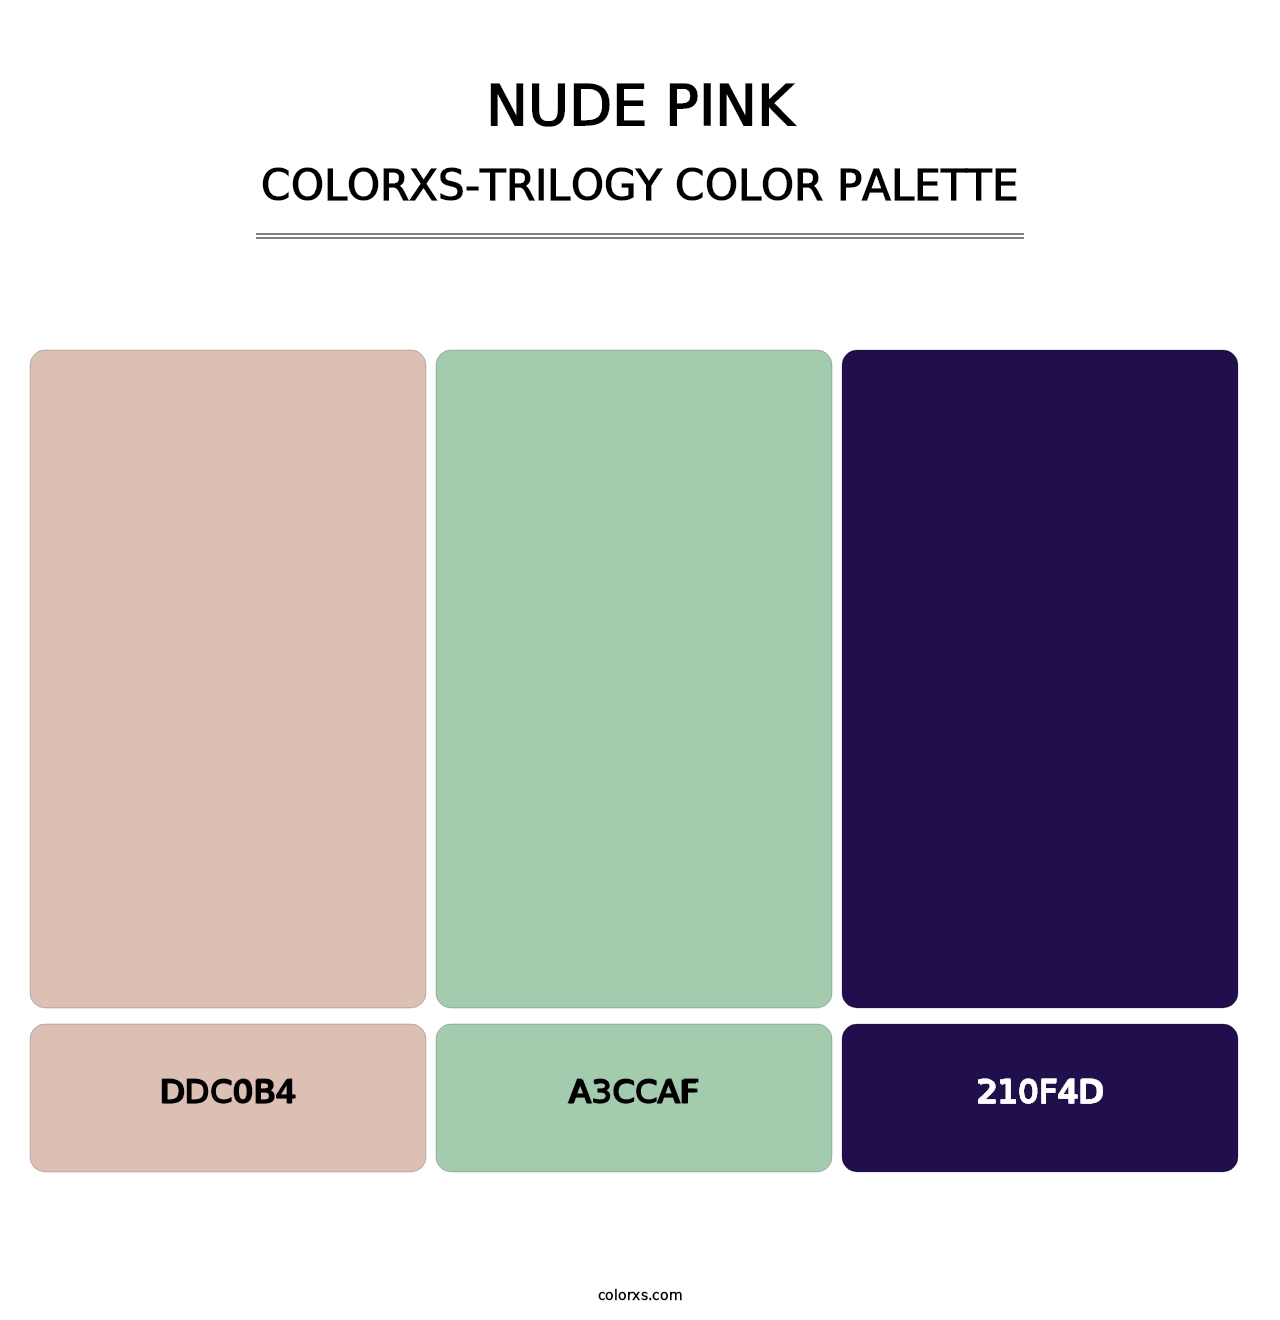 Nude Pink - Colorxs Trilogy Palette